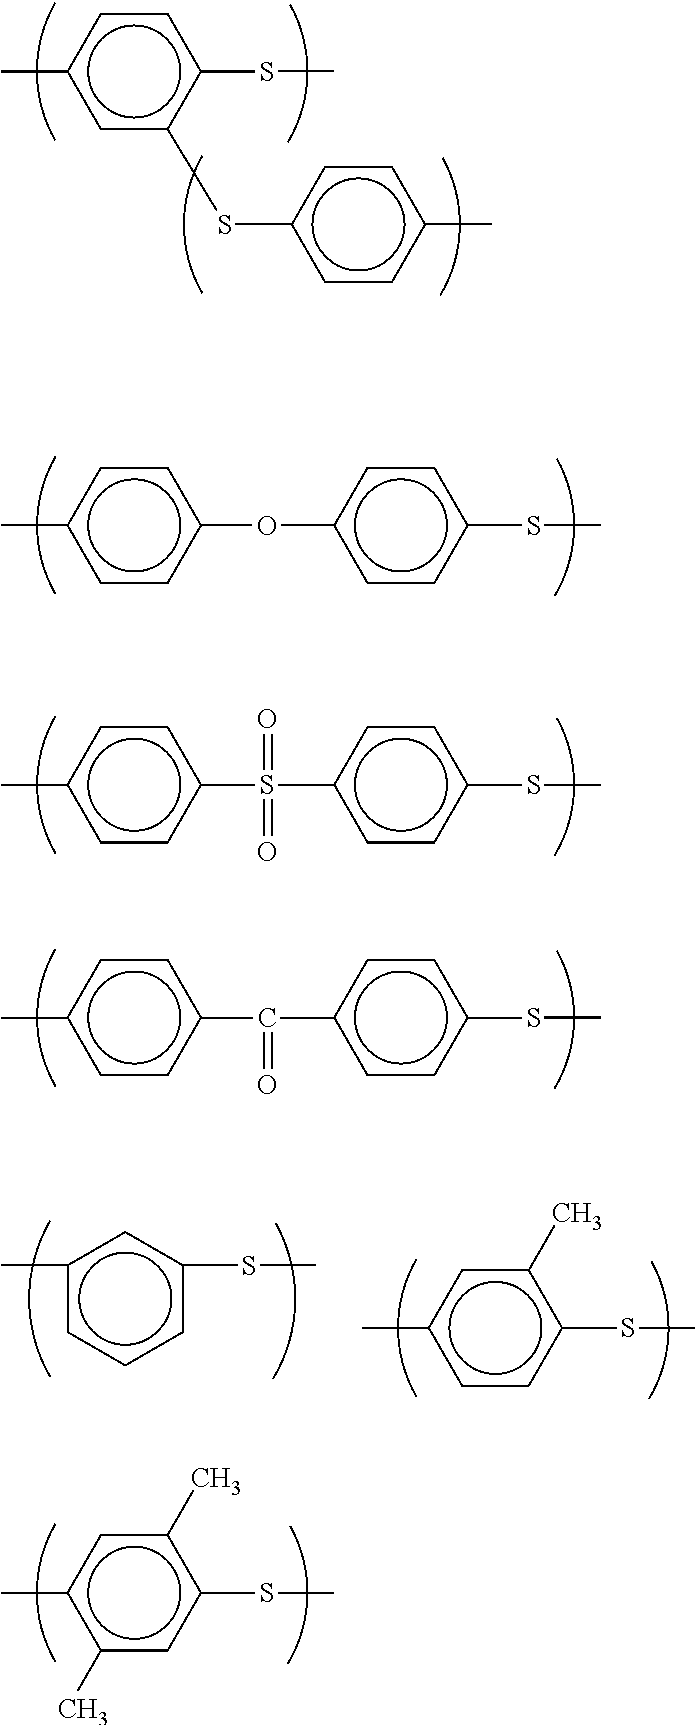 Polyphenylene sulfide resin composition and molding comprising same (as amended)